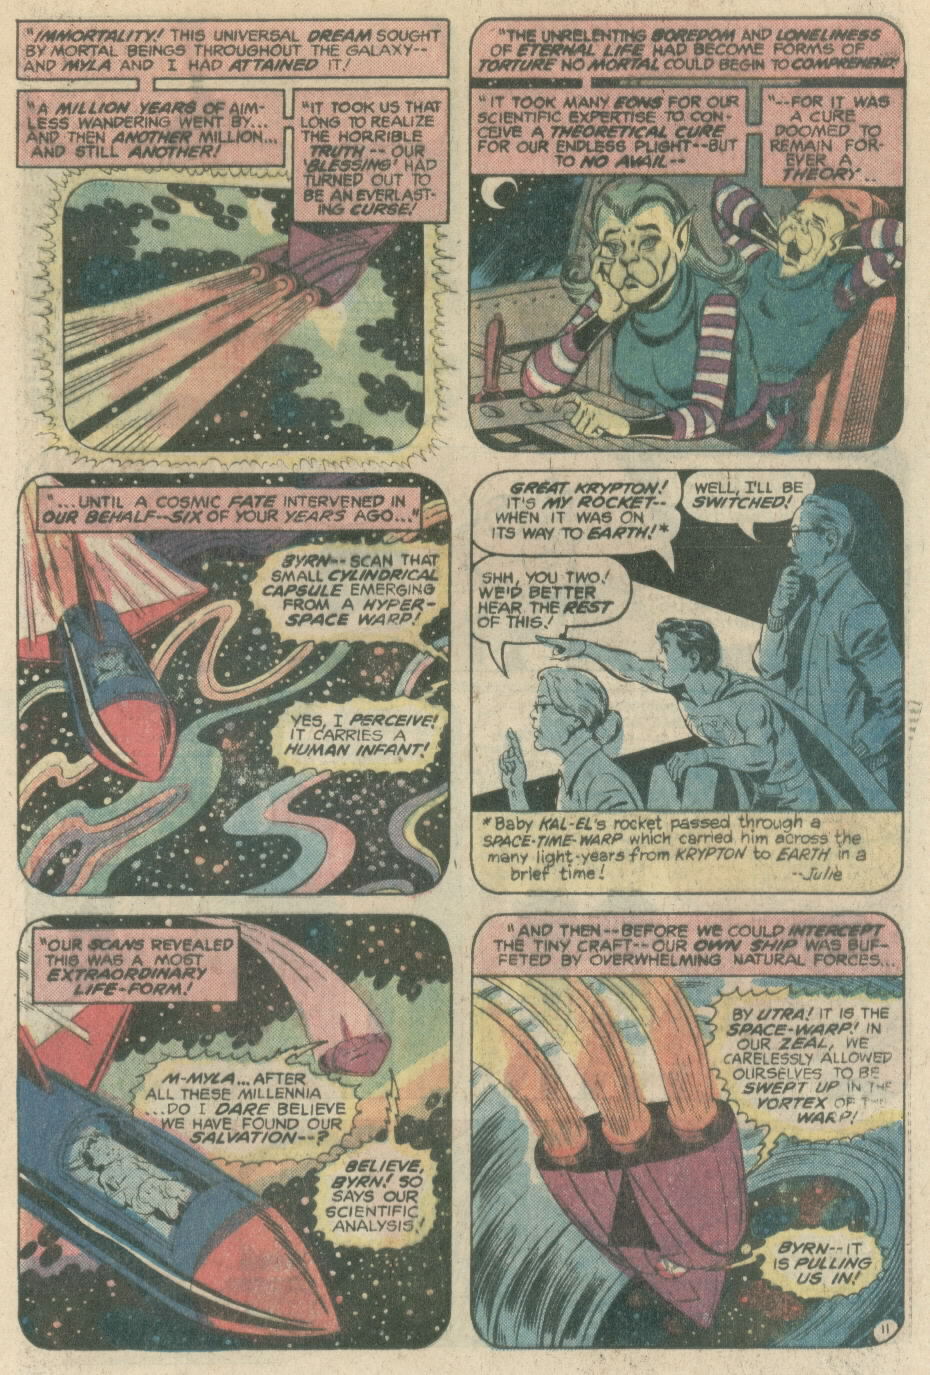 The New Adventures of Superboy 1 Page 11